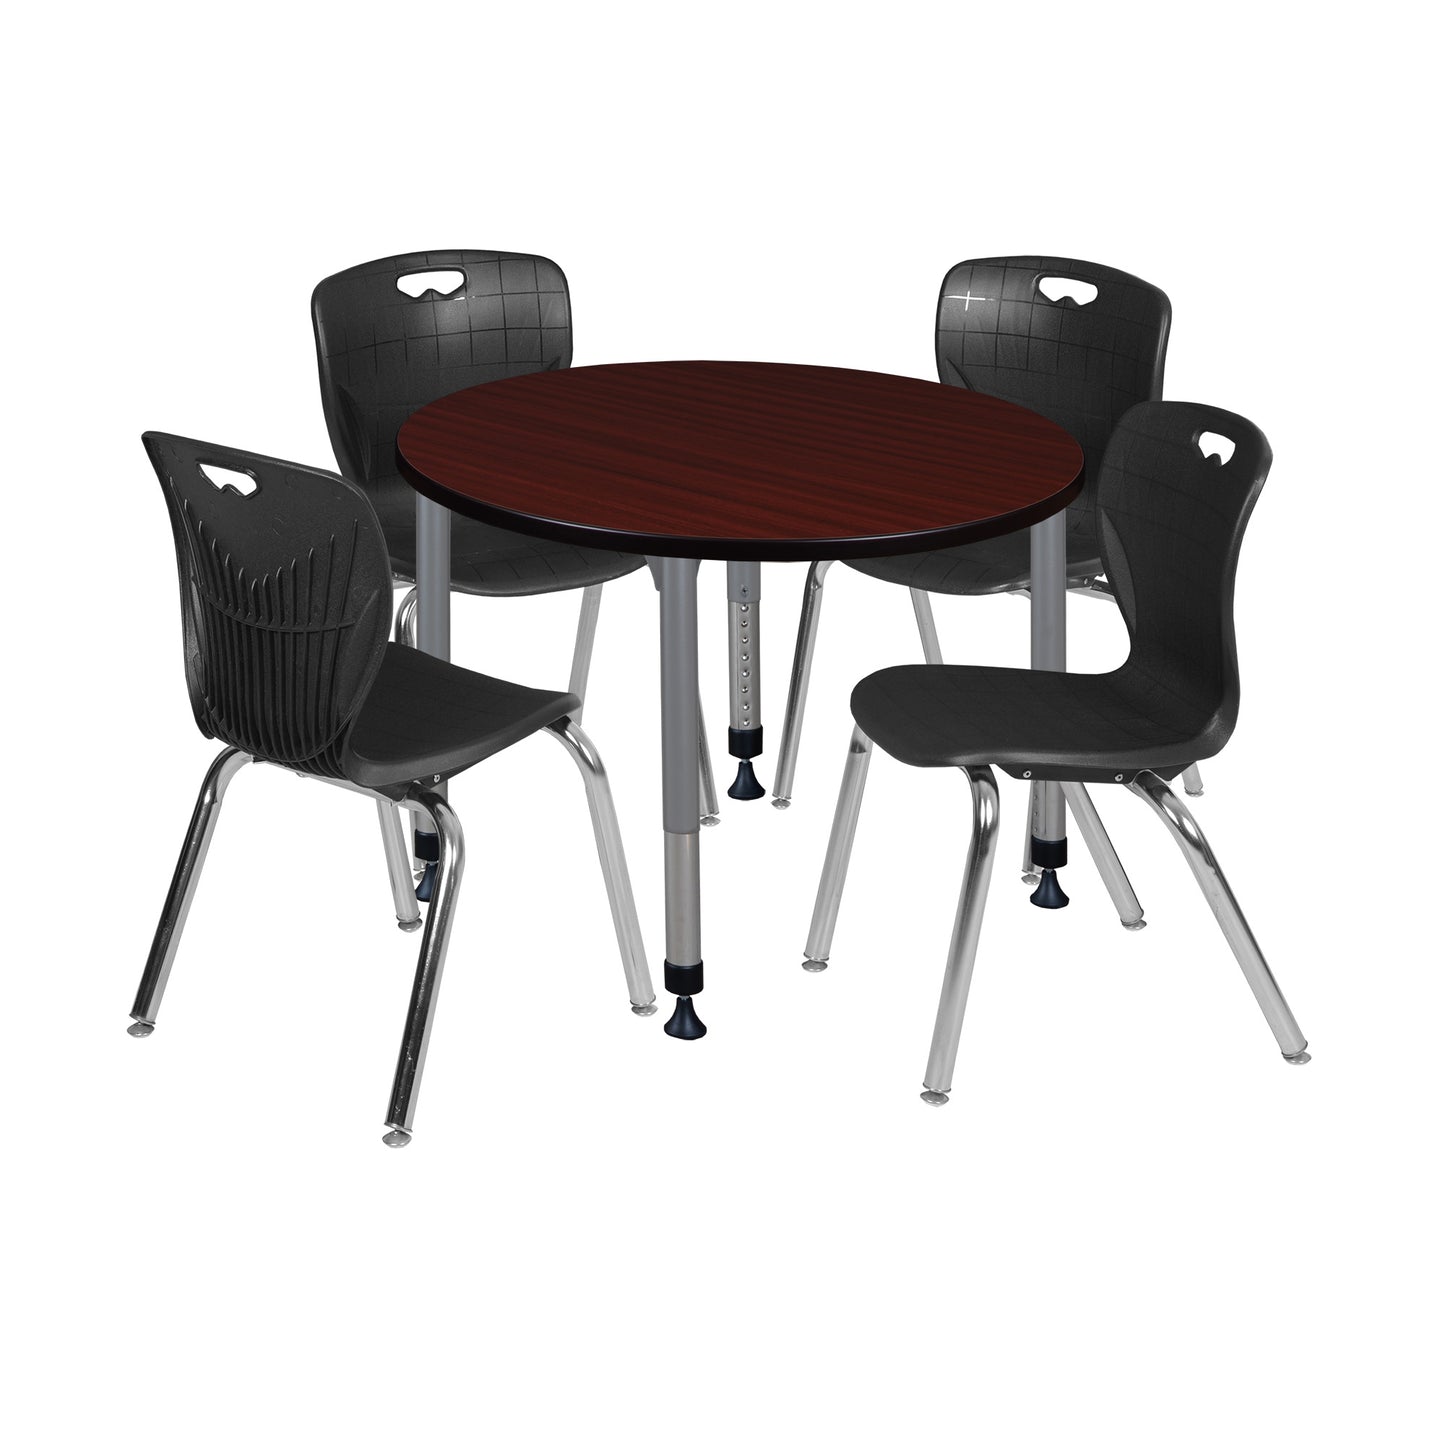 Regency Kee 36 in. Round Adjustable Classroom Table & 4 Andy 18 in. Stack Chairs